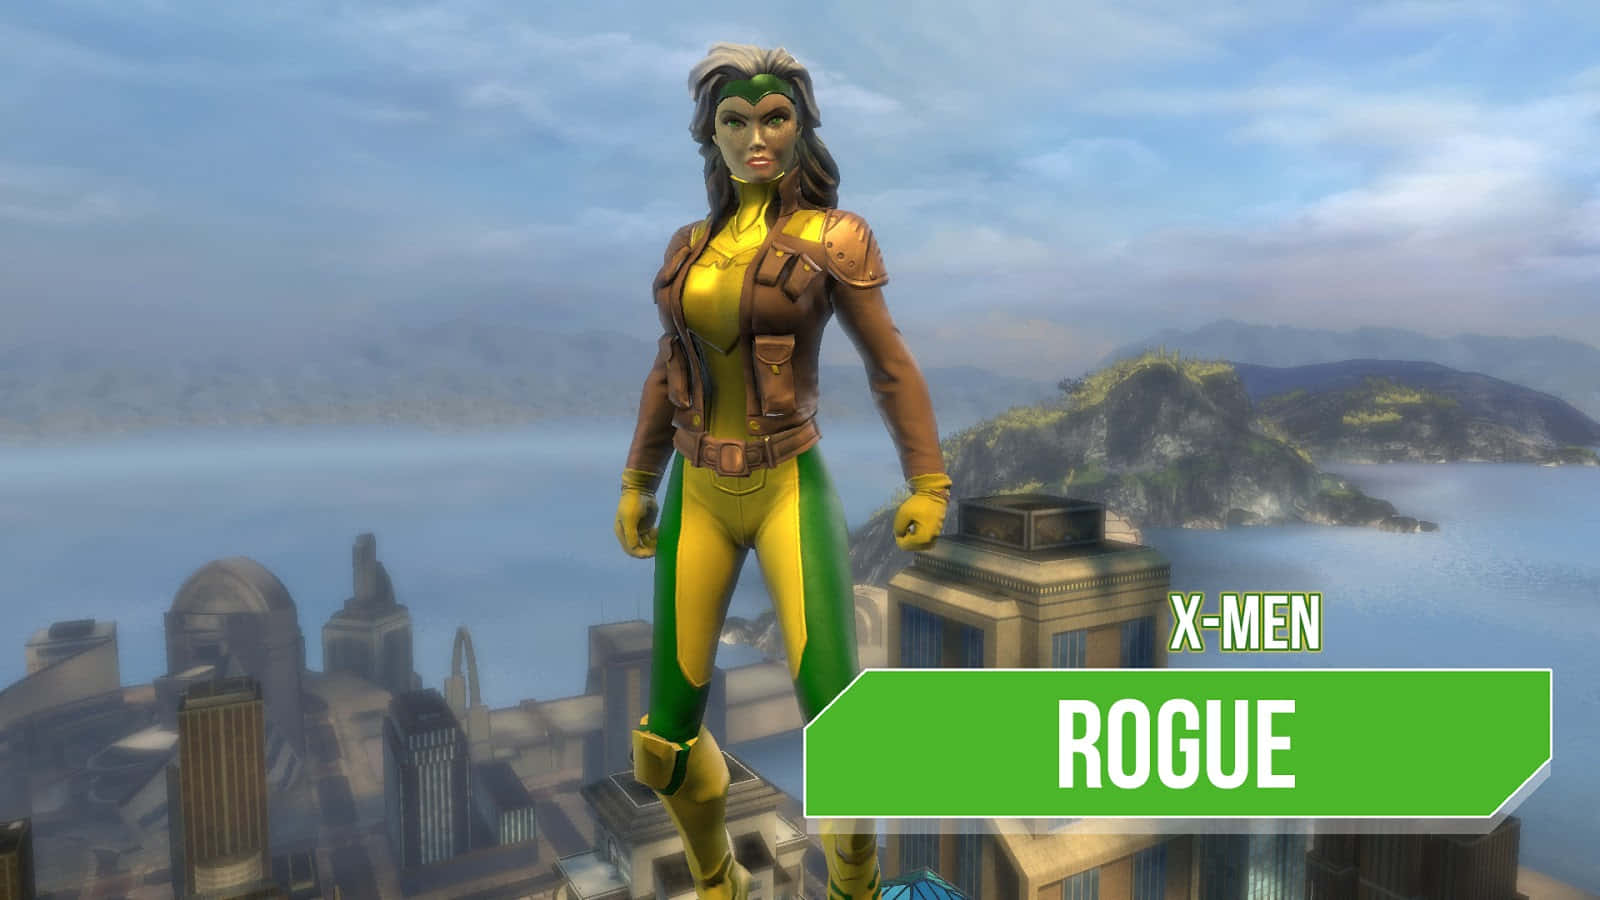 A Woman In A Yellow And Green Costume Is Standing On A City